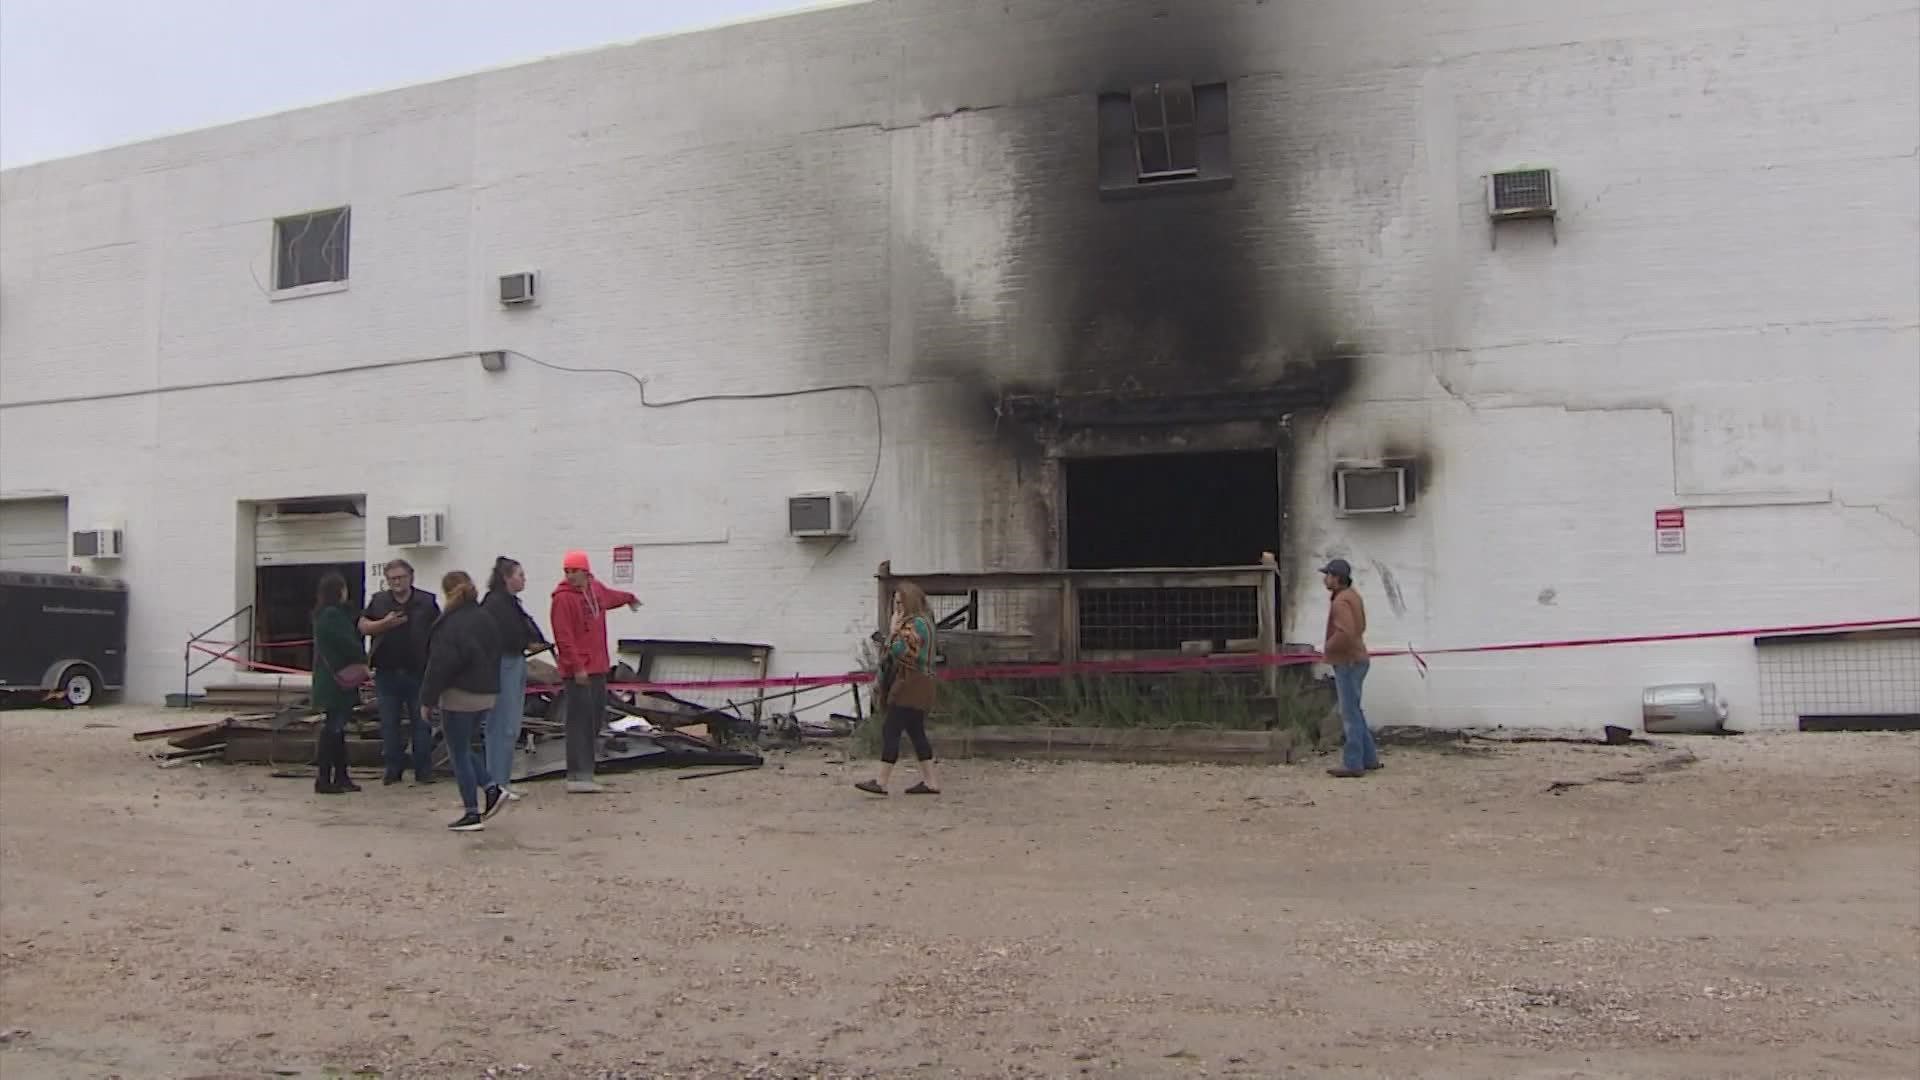 The building was home to several local artists and a production studio. Some of the artists didn't have insurance.